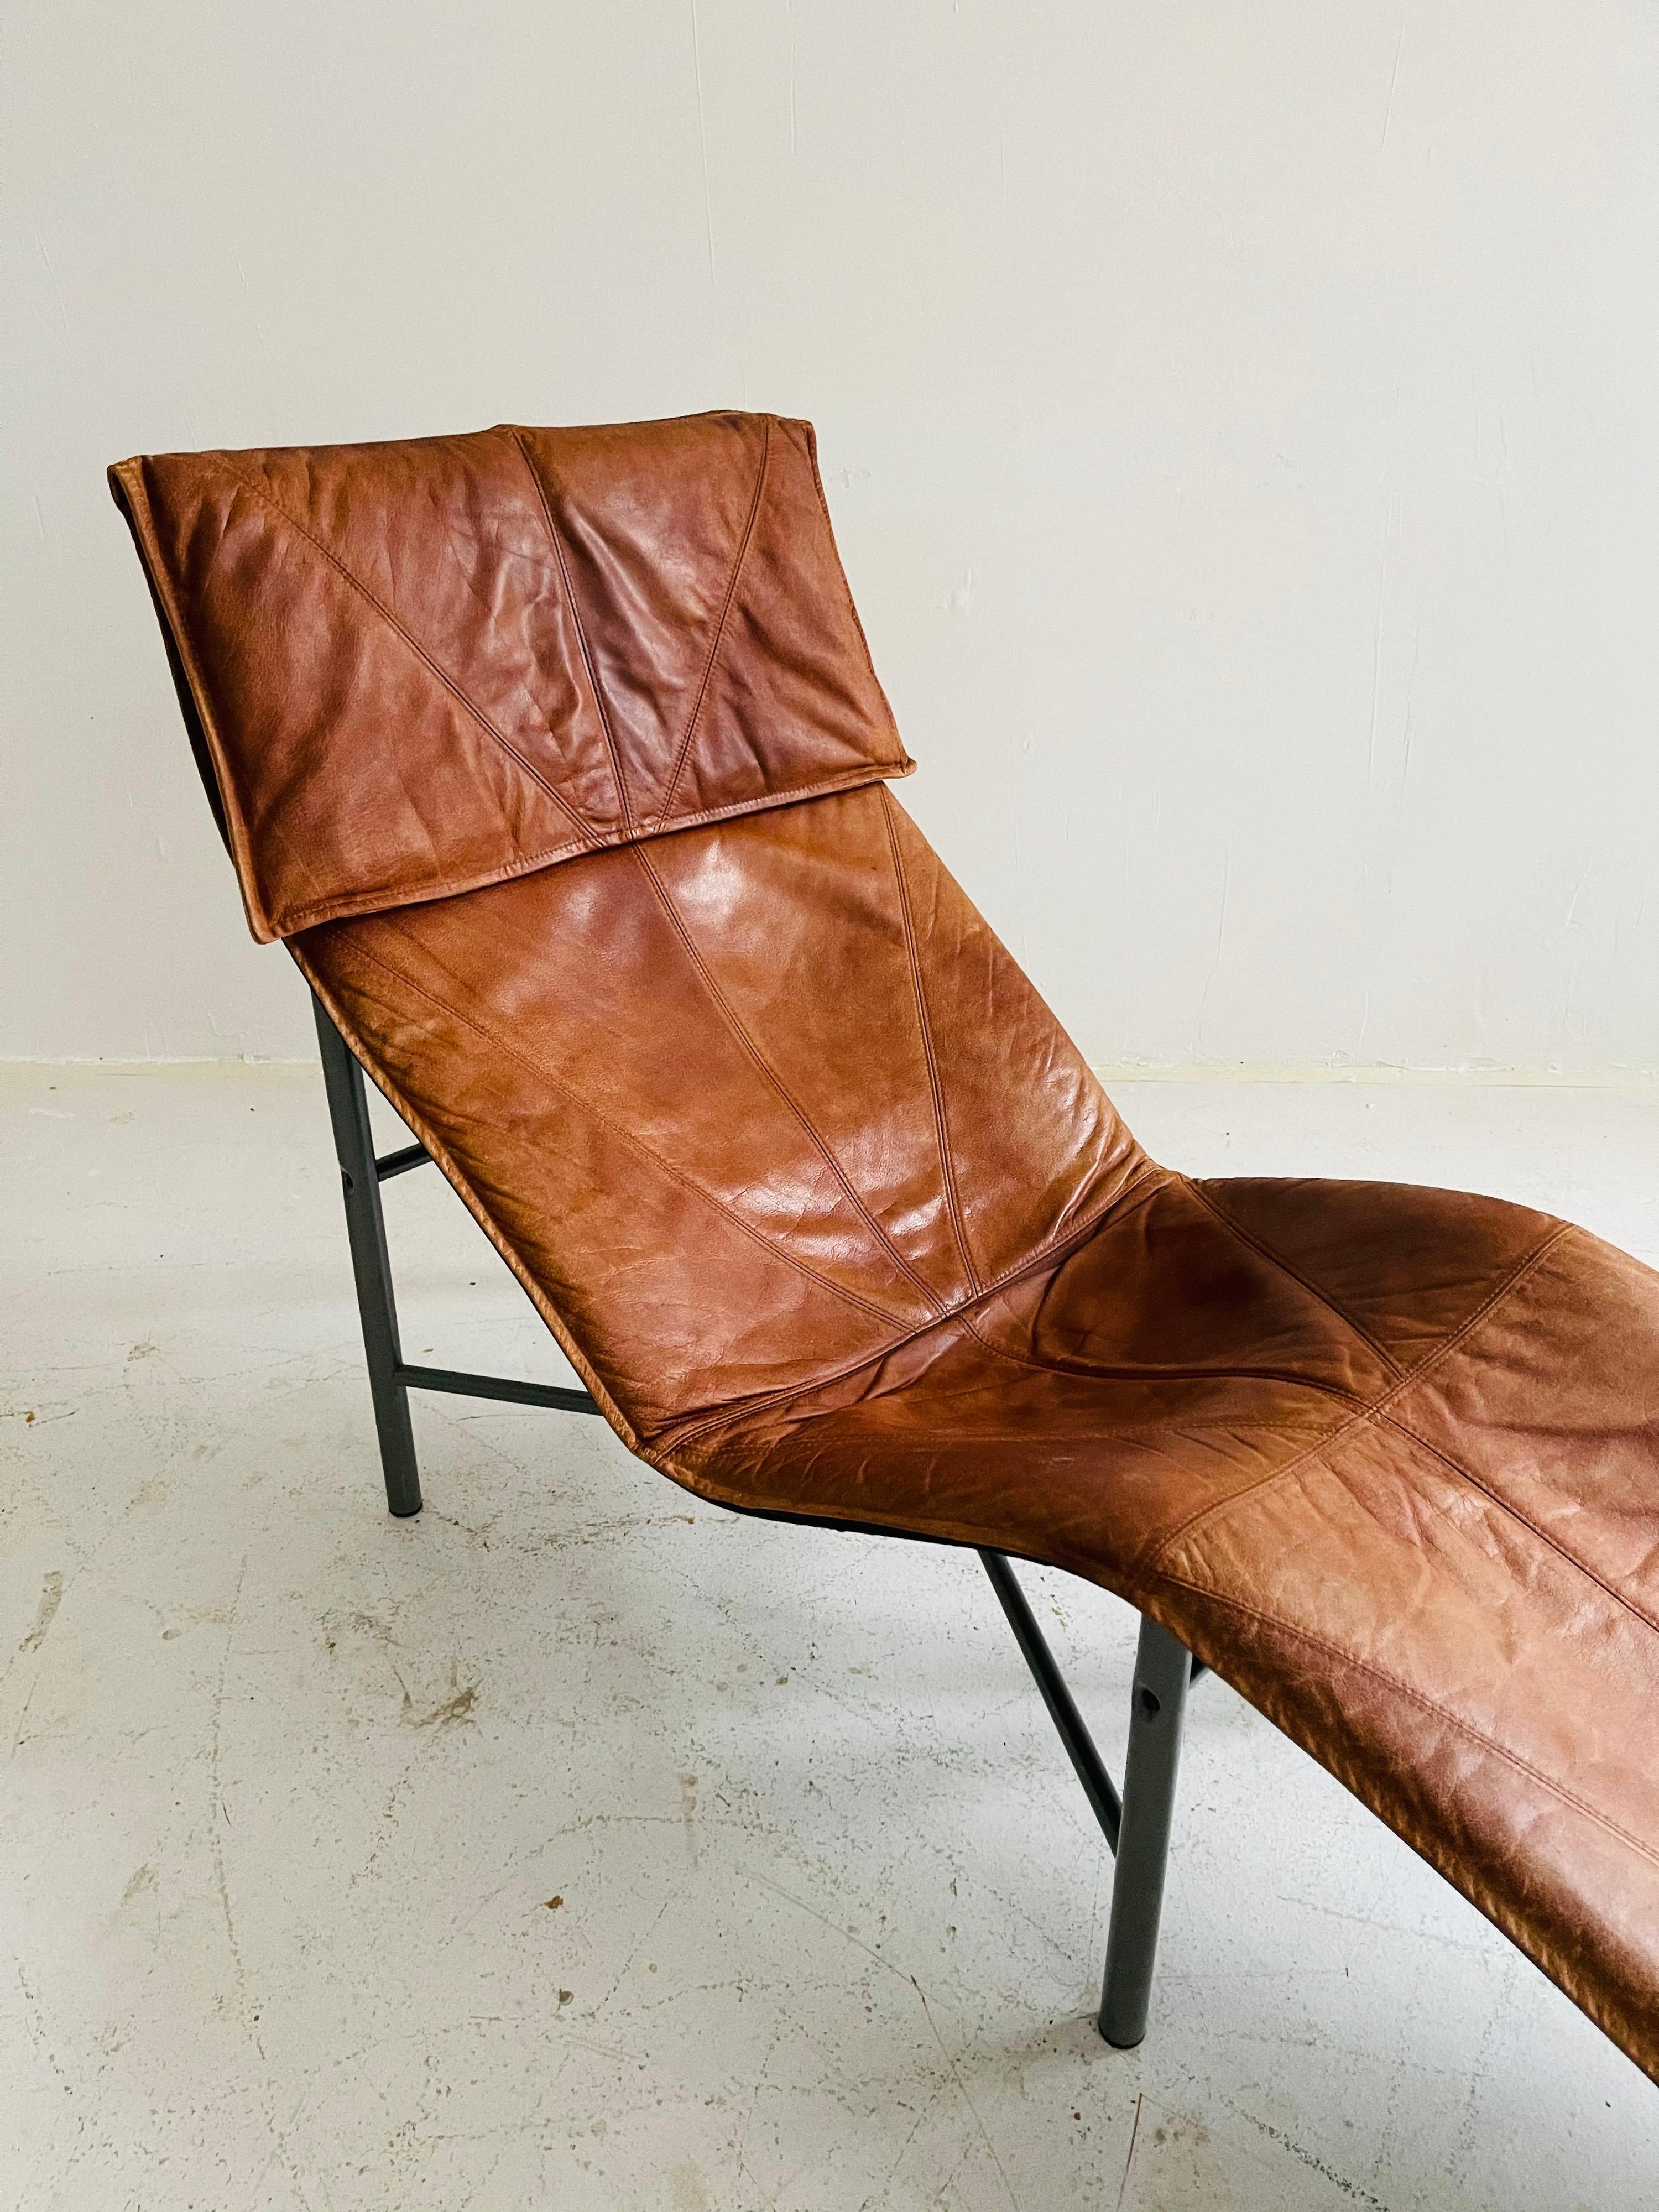 Patinated Cognac Leather Chaise Longue by Tord Bjorklund, Sweden, 1970 For Sale 7